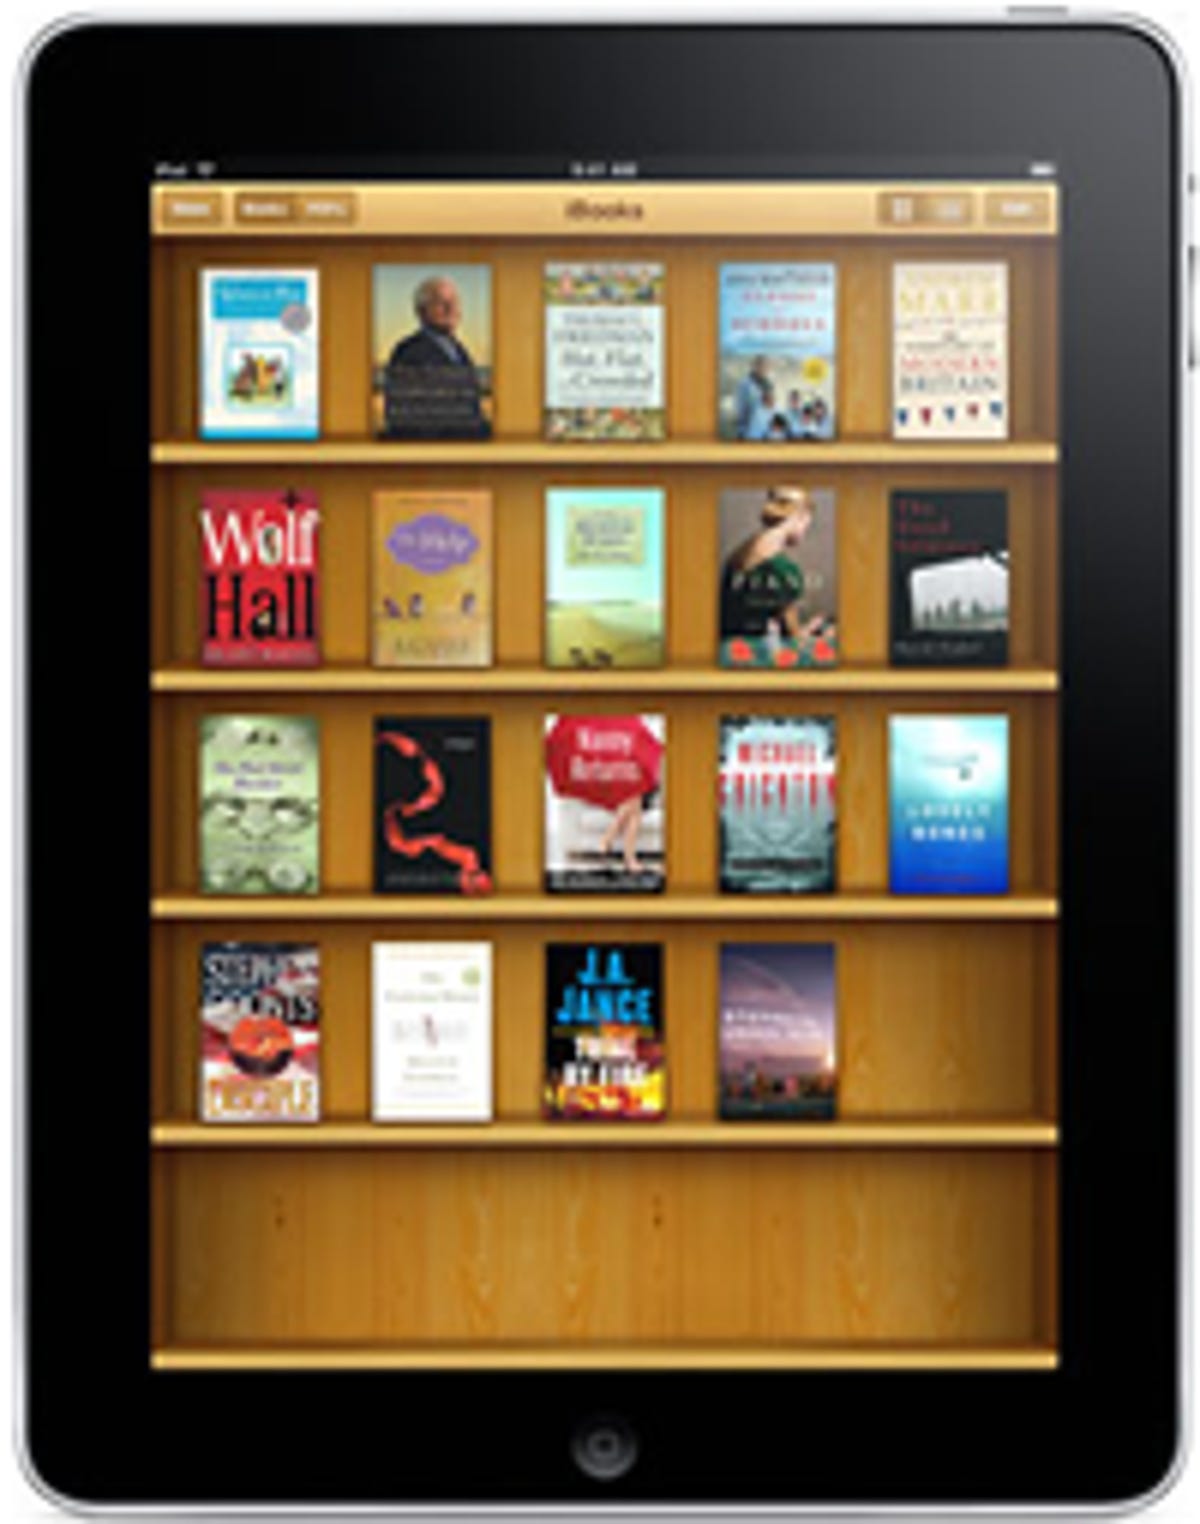 Is the iPad edging out e-readers and portable game consoles?